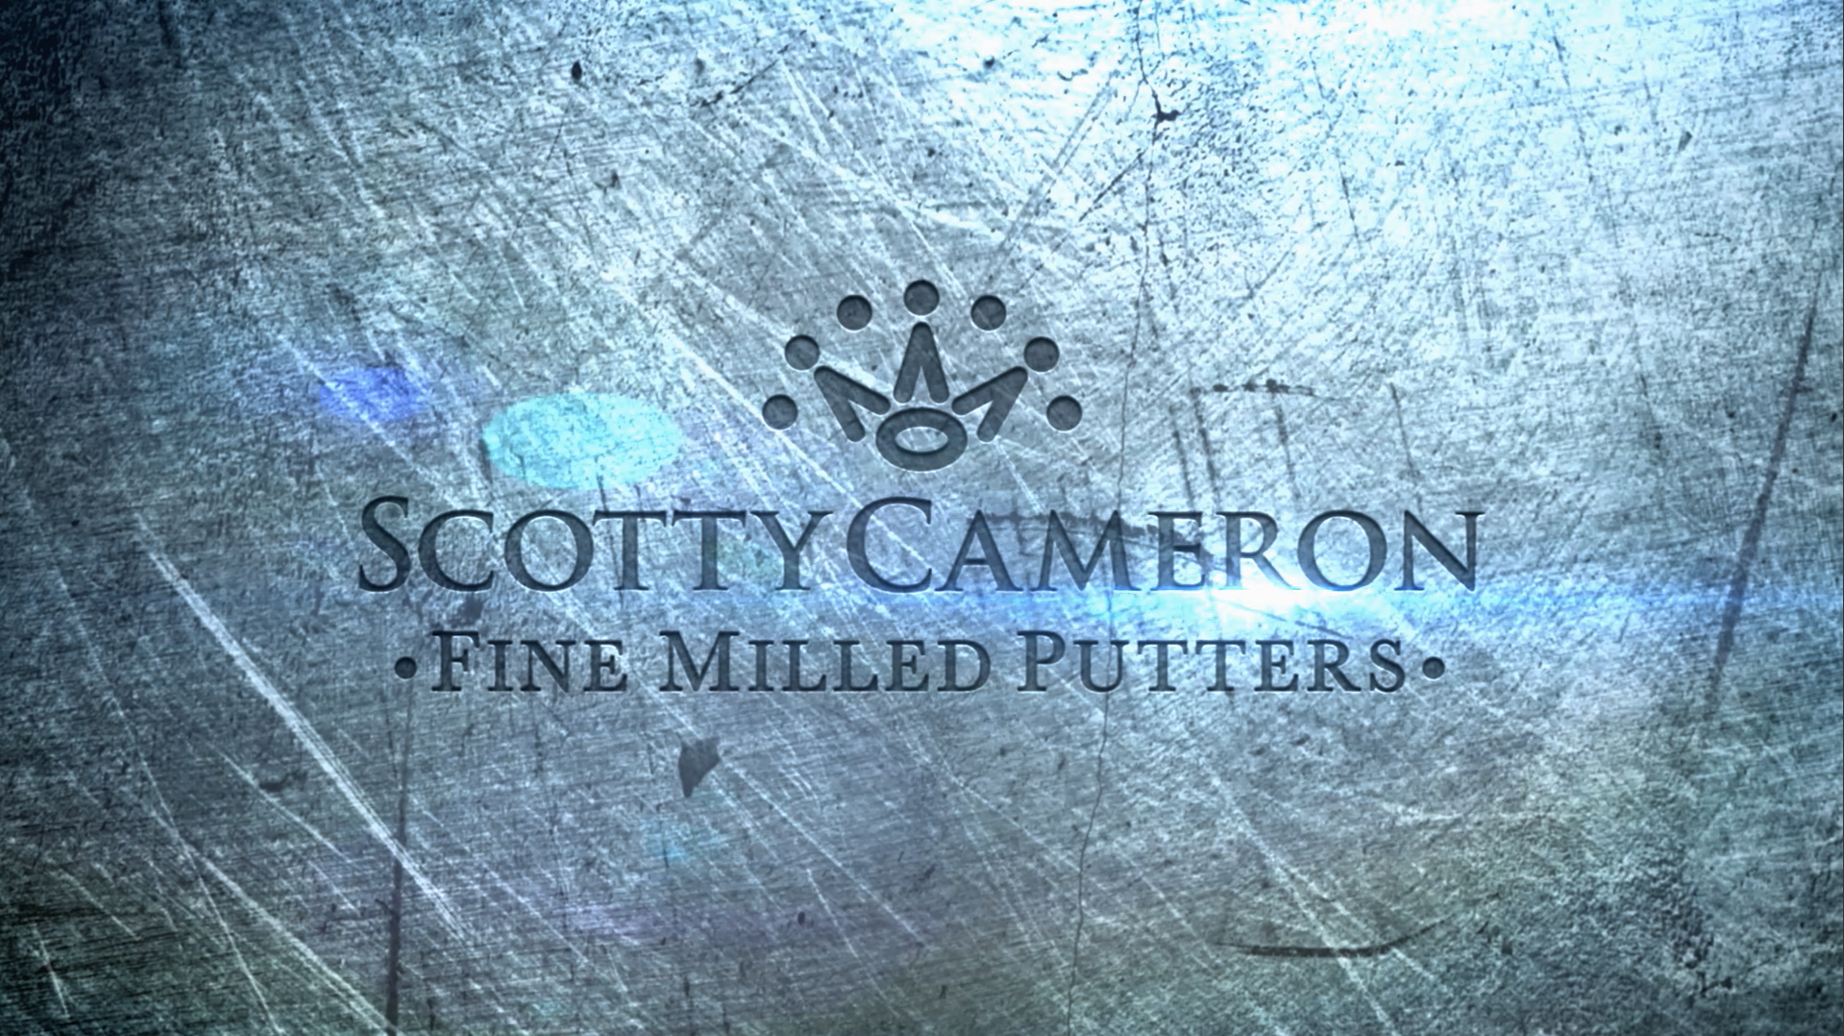 Inside the Scotty Cameron Putter Studio in Southern California my